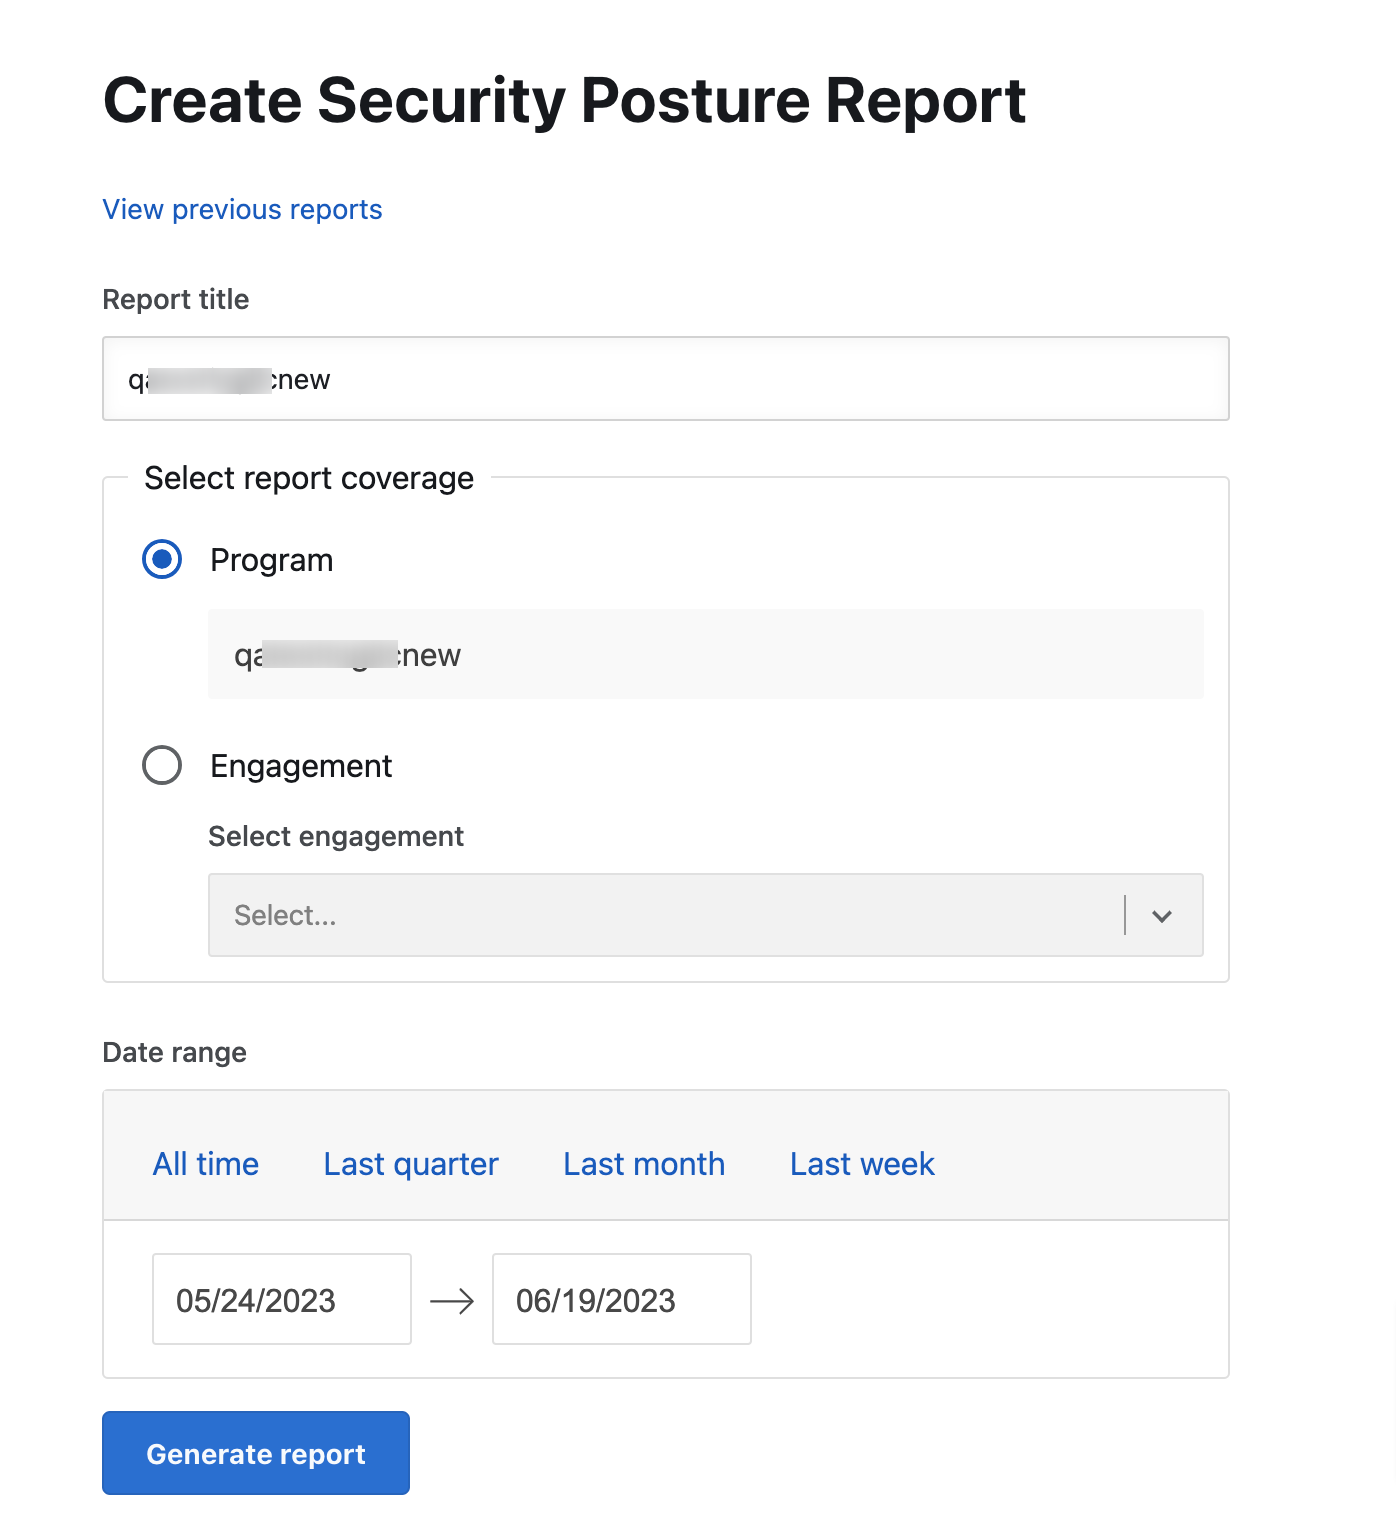 Create security posture report page